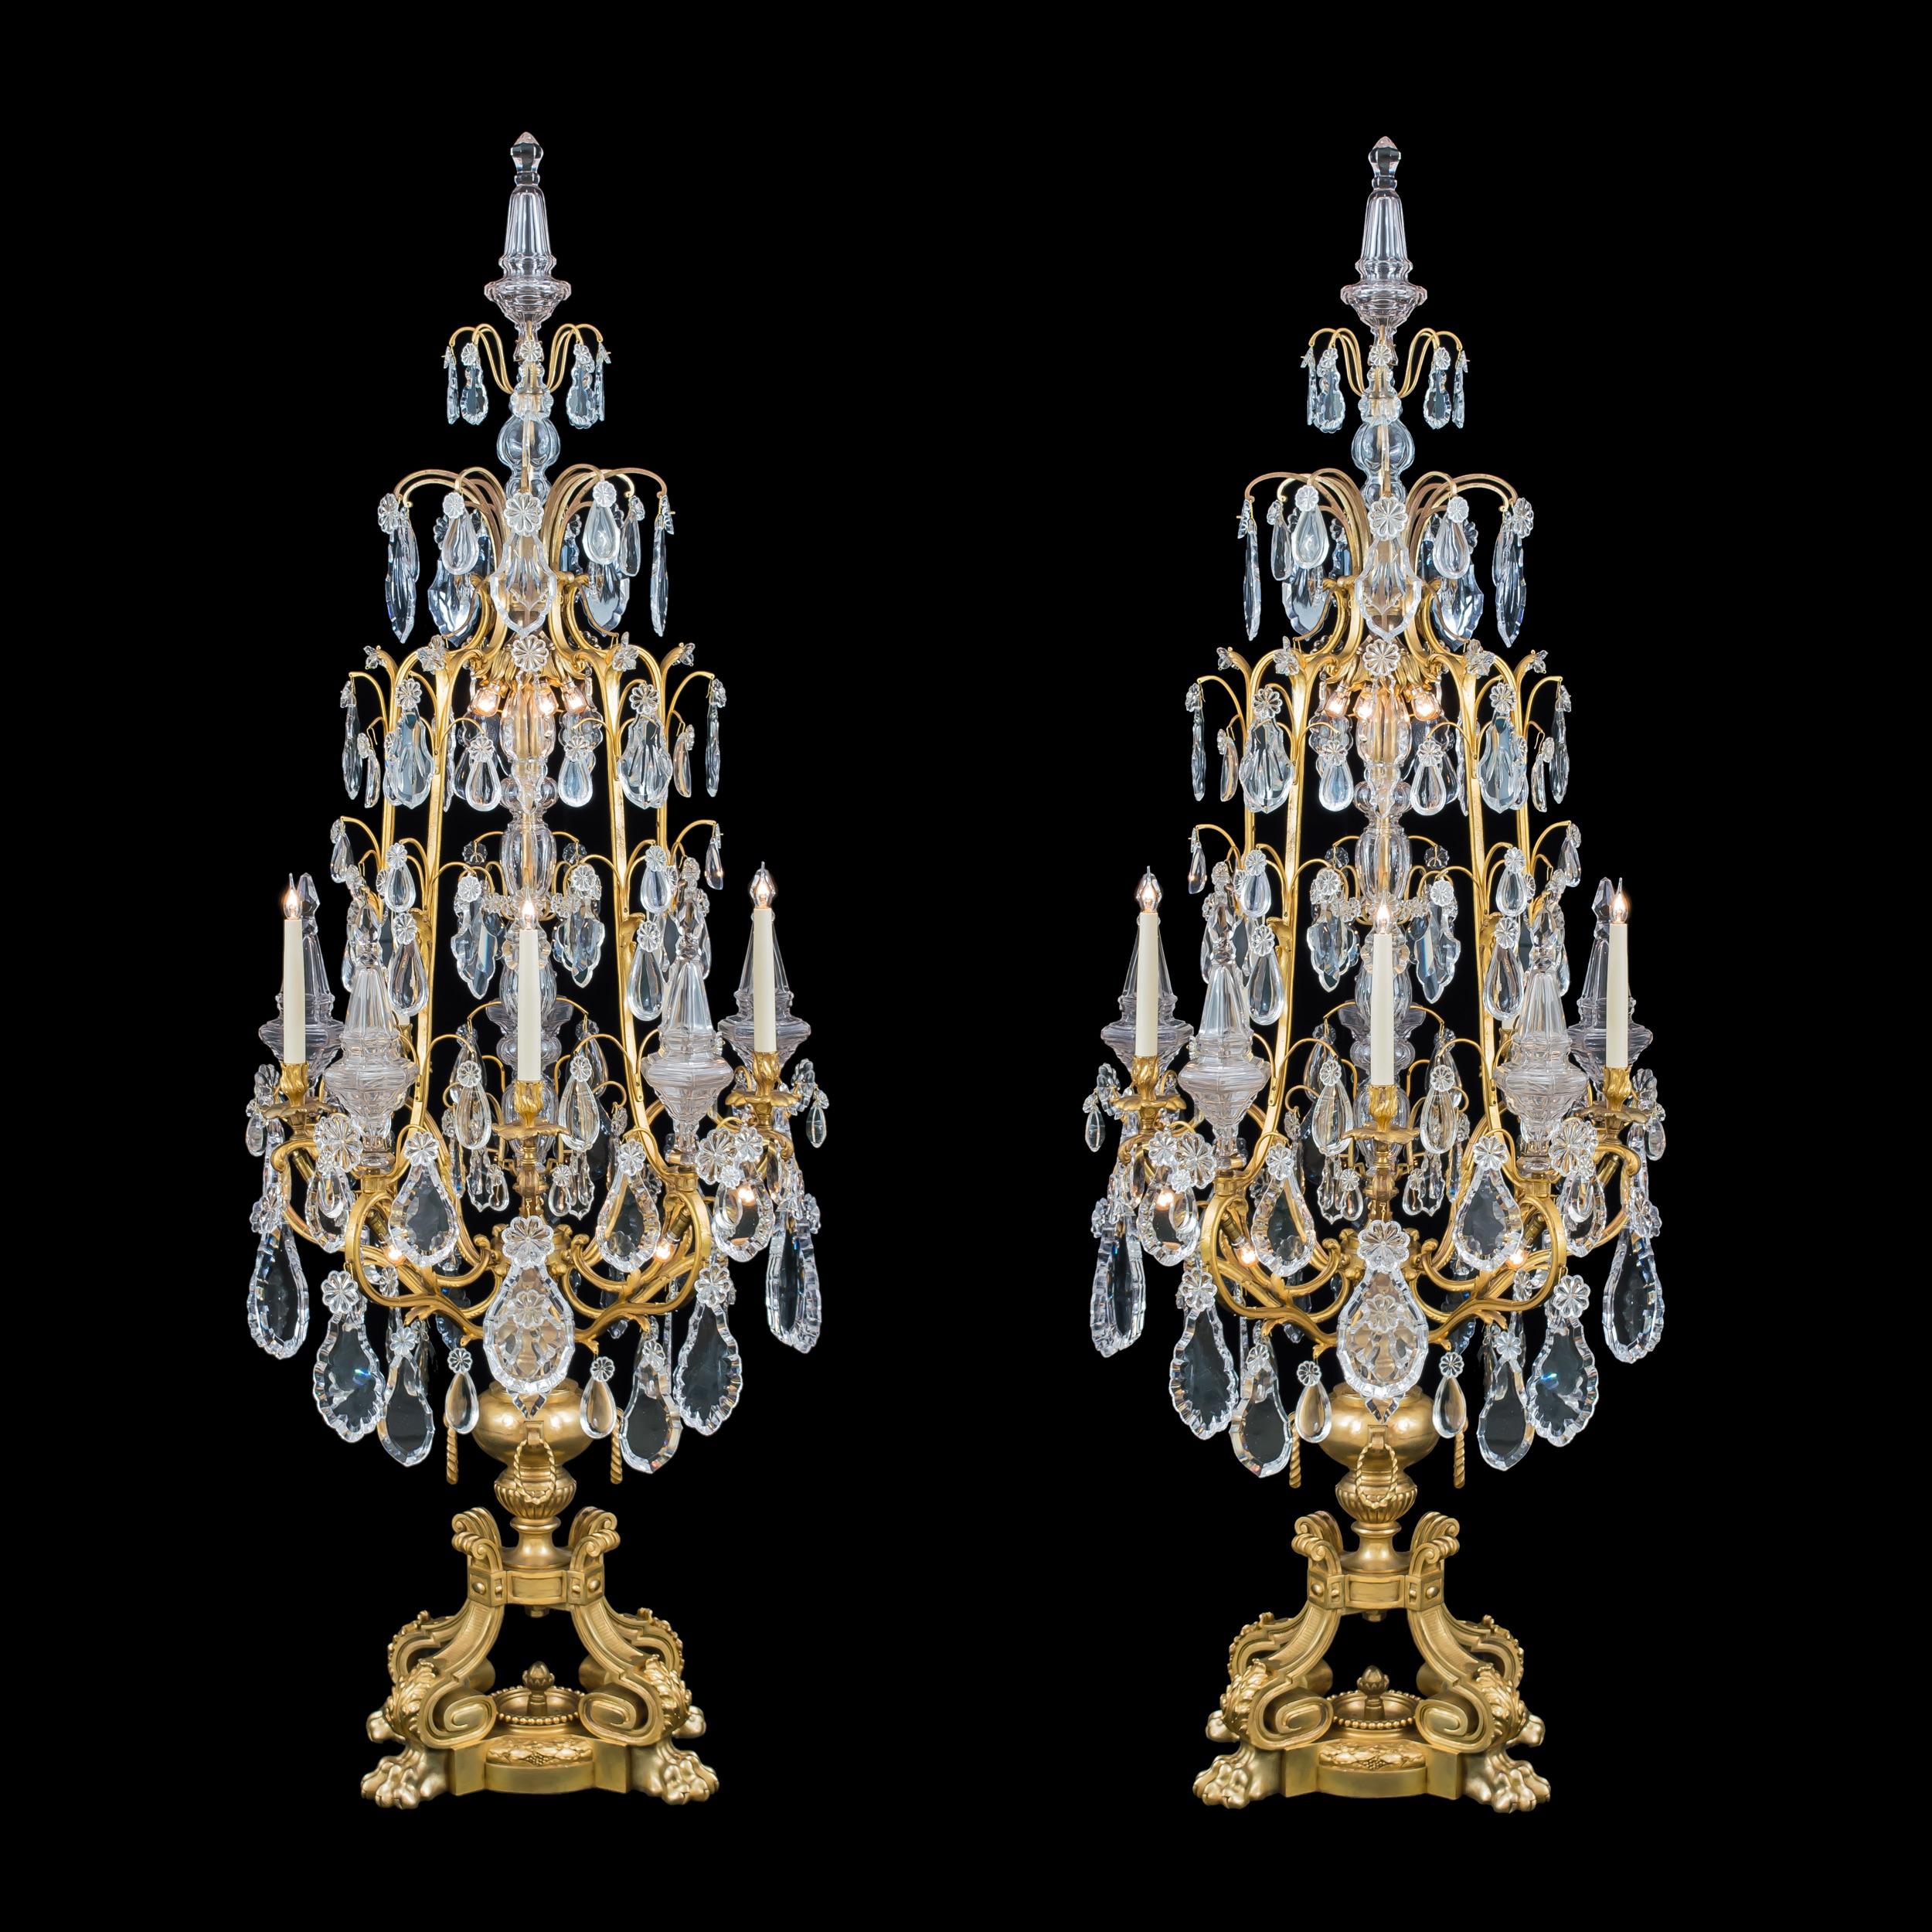 French Monumental Pair of Louis XV Style Ormolu and Crystal Girandoles by Baccarat For Sale